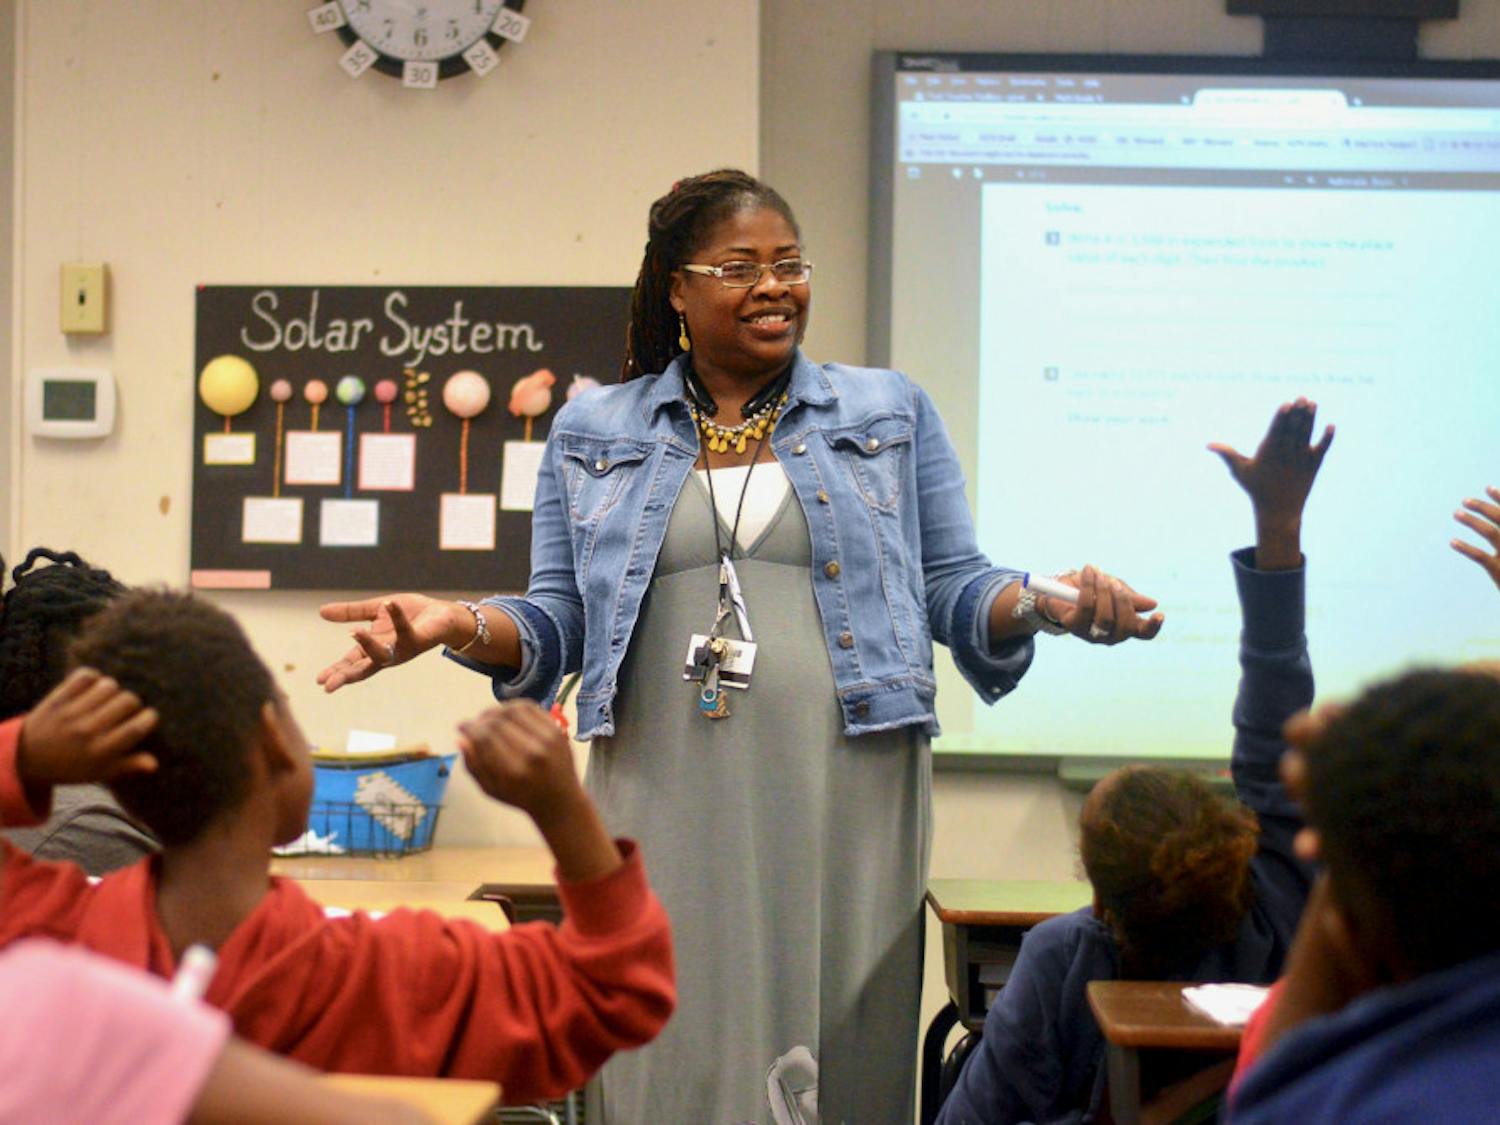 [FILE PHOTO] 35-year-old Lilliemarie Gore leads students of Idylwild Elementary School through a series of math exercises. Mrs. Gore was awarded the title of "2017-2018 Alachua County Teacher of the Year" earlier this month. 